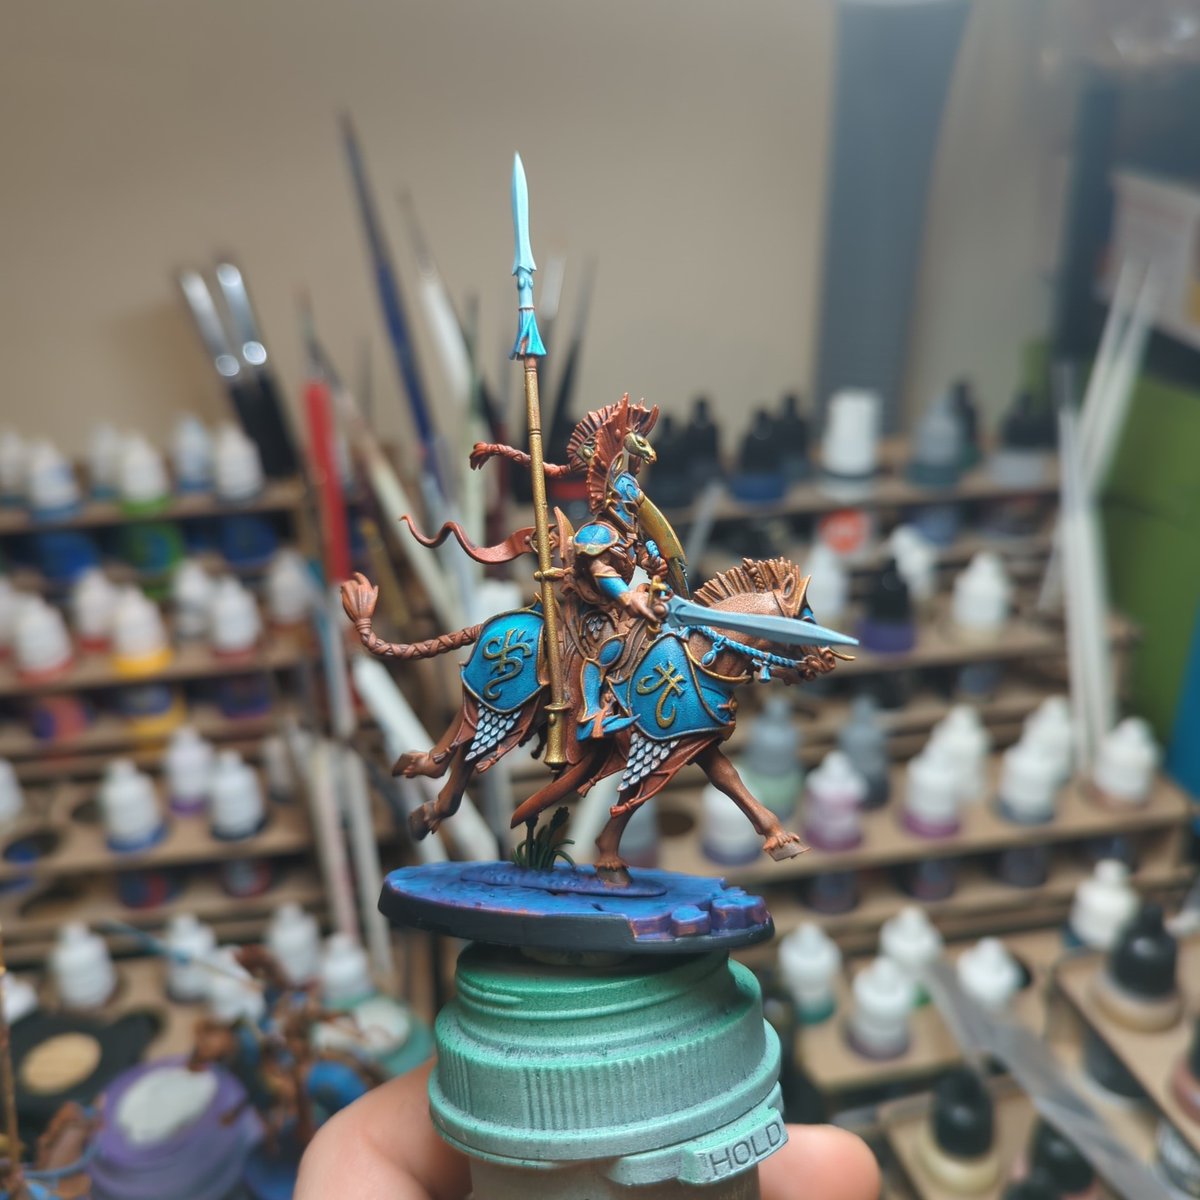 Hobby Streak Day 785
The riders and enlightener are done! This is the rider leader! Onto the last 5 archers tomorrow!
#hobbystreak #warhammeraos #ageofsigmar #luminethrealnlords